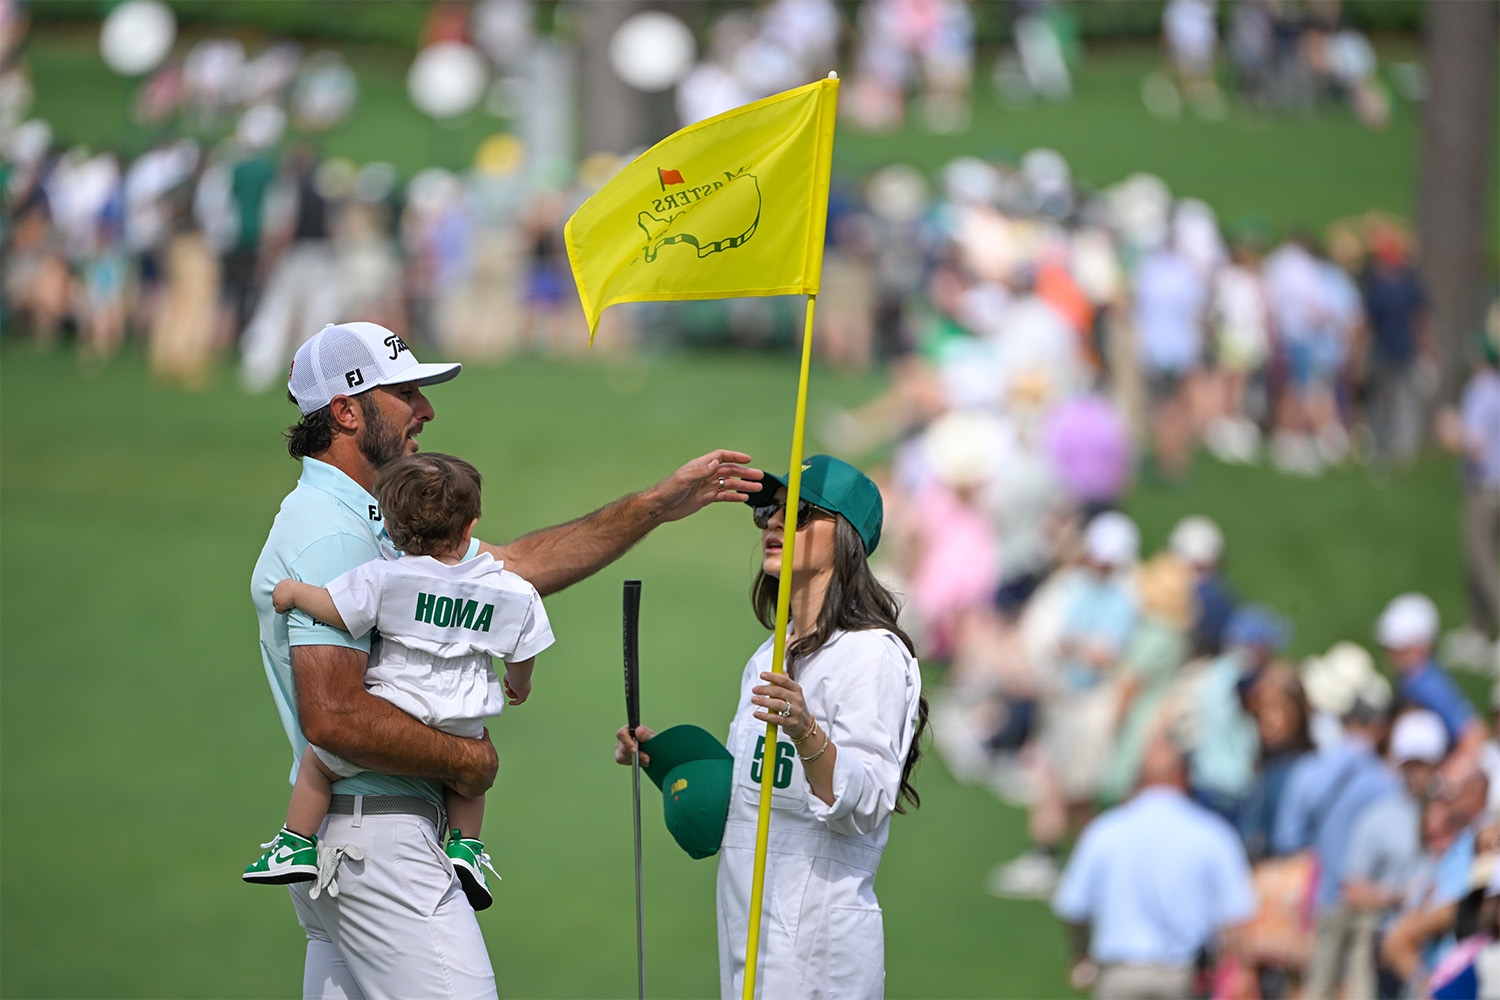 Max Homa holding his baby and standing next to his wife at The Masters.